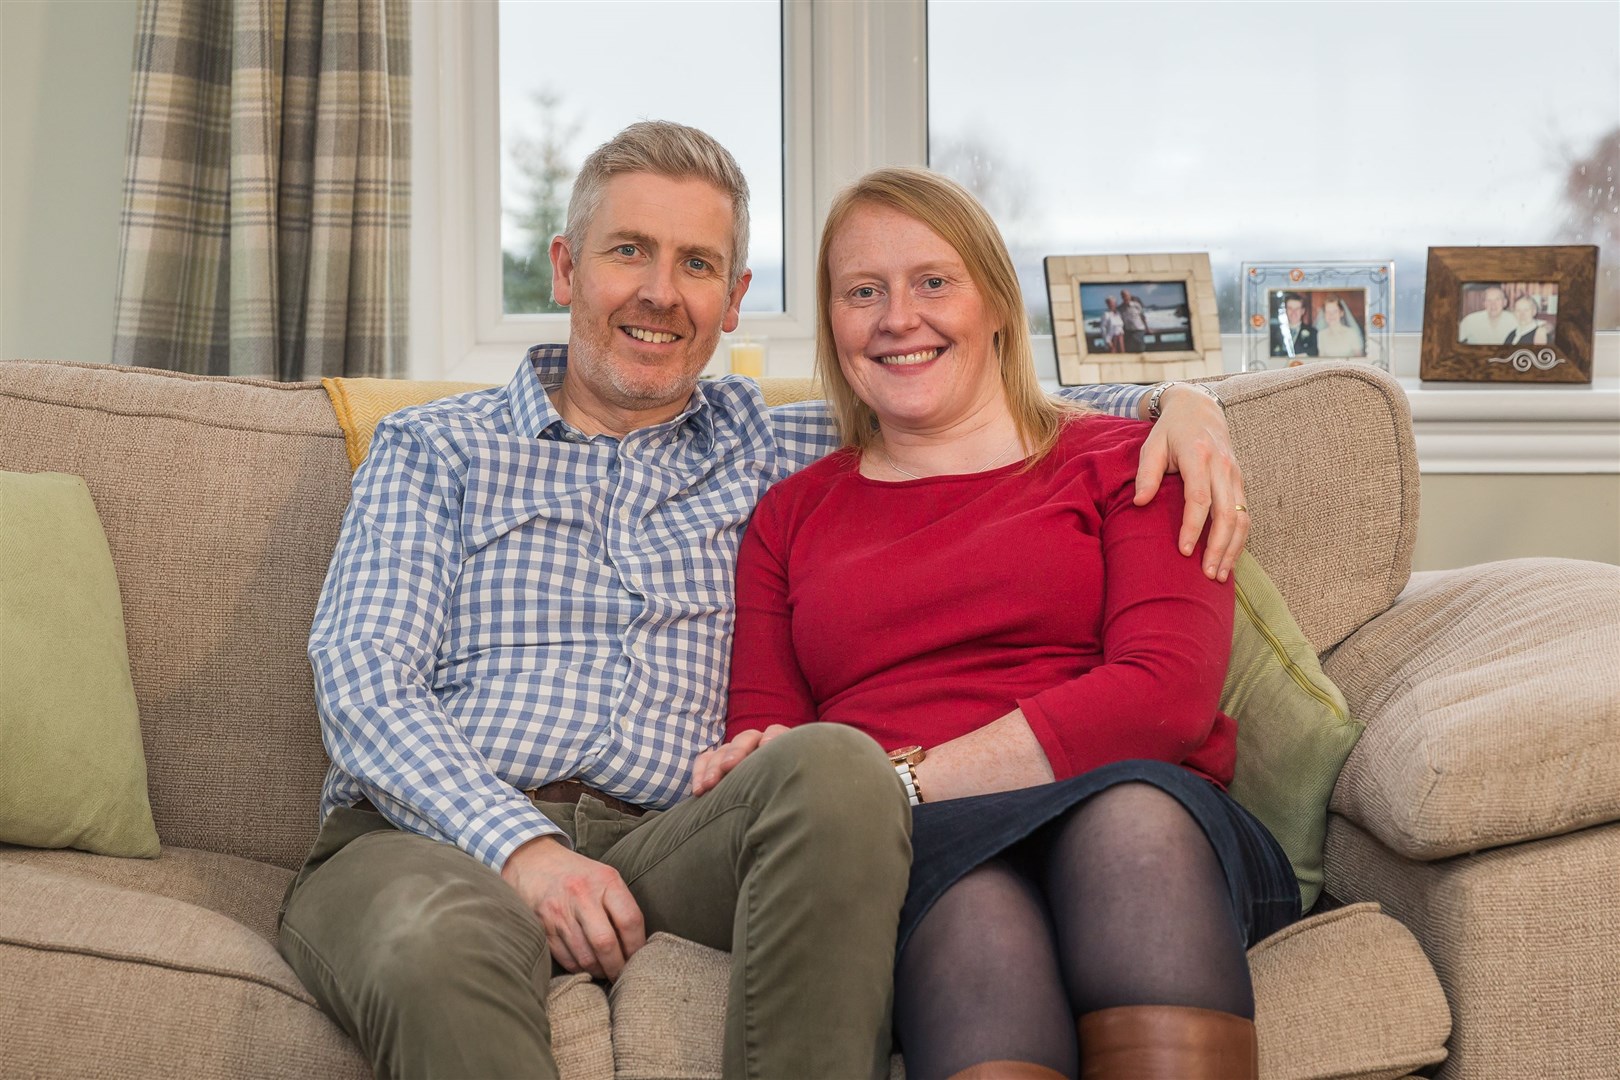 Johan Ross gave a second chance in life to her husband by donating her kidney to him.